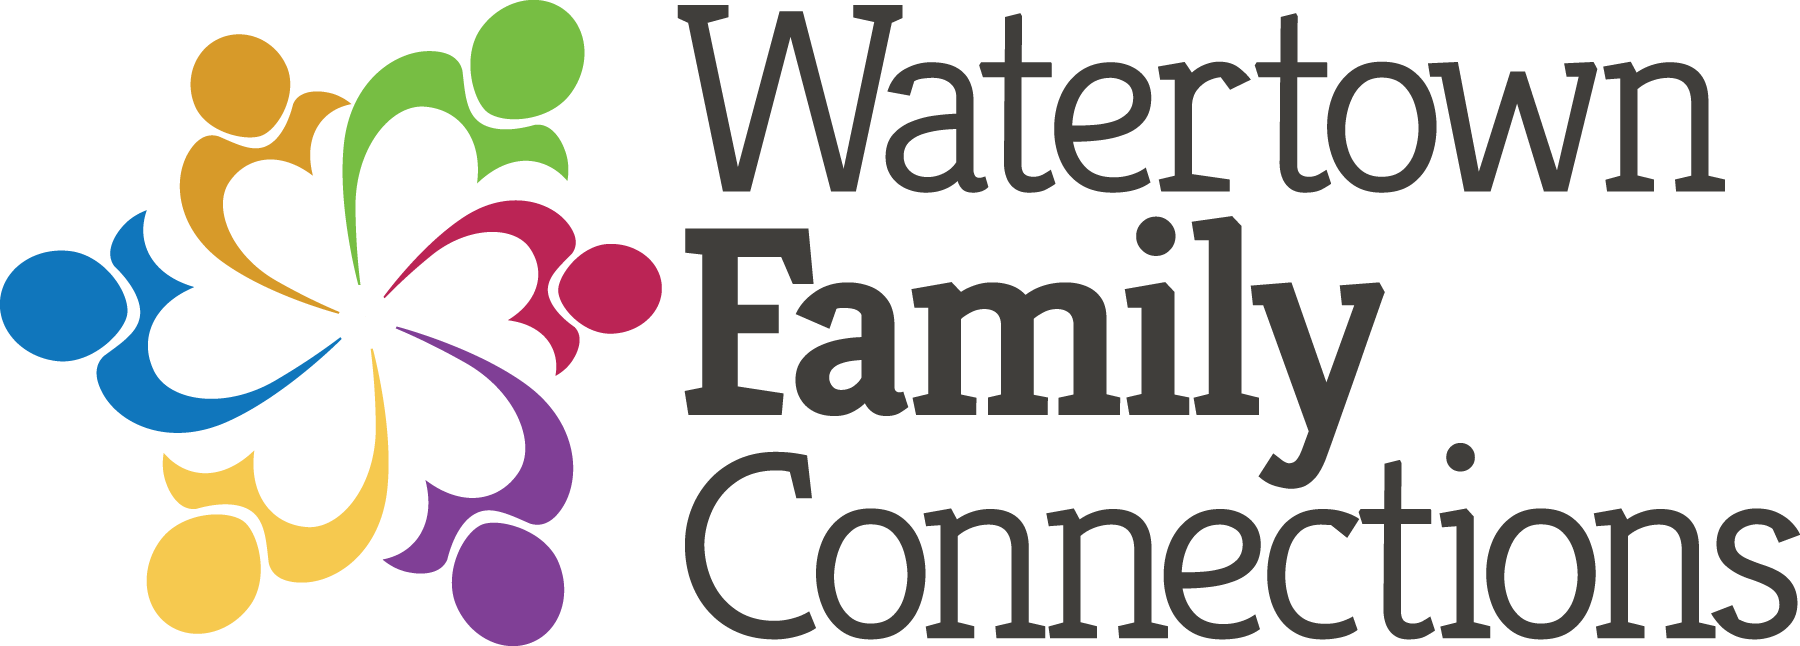 Events for May 26 April 28 › Playgroup › Watertown Family Connections